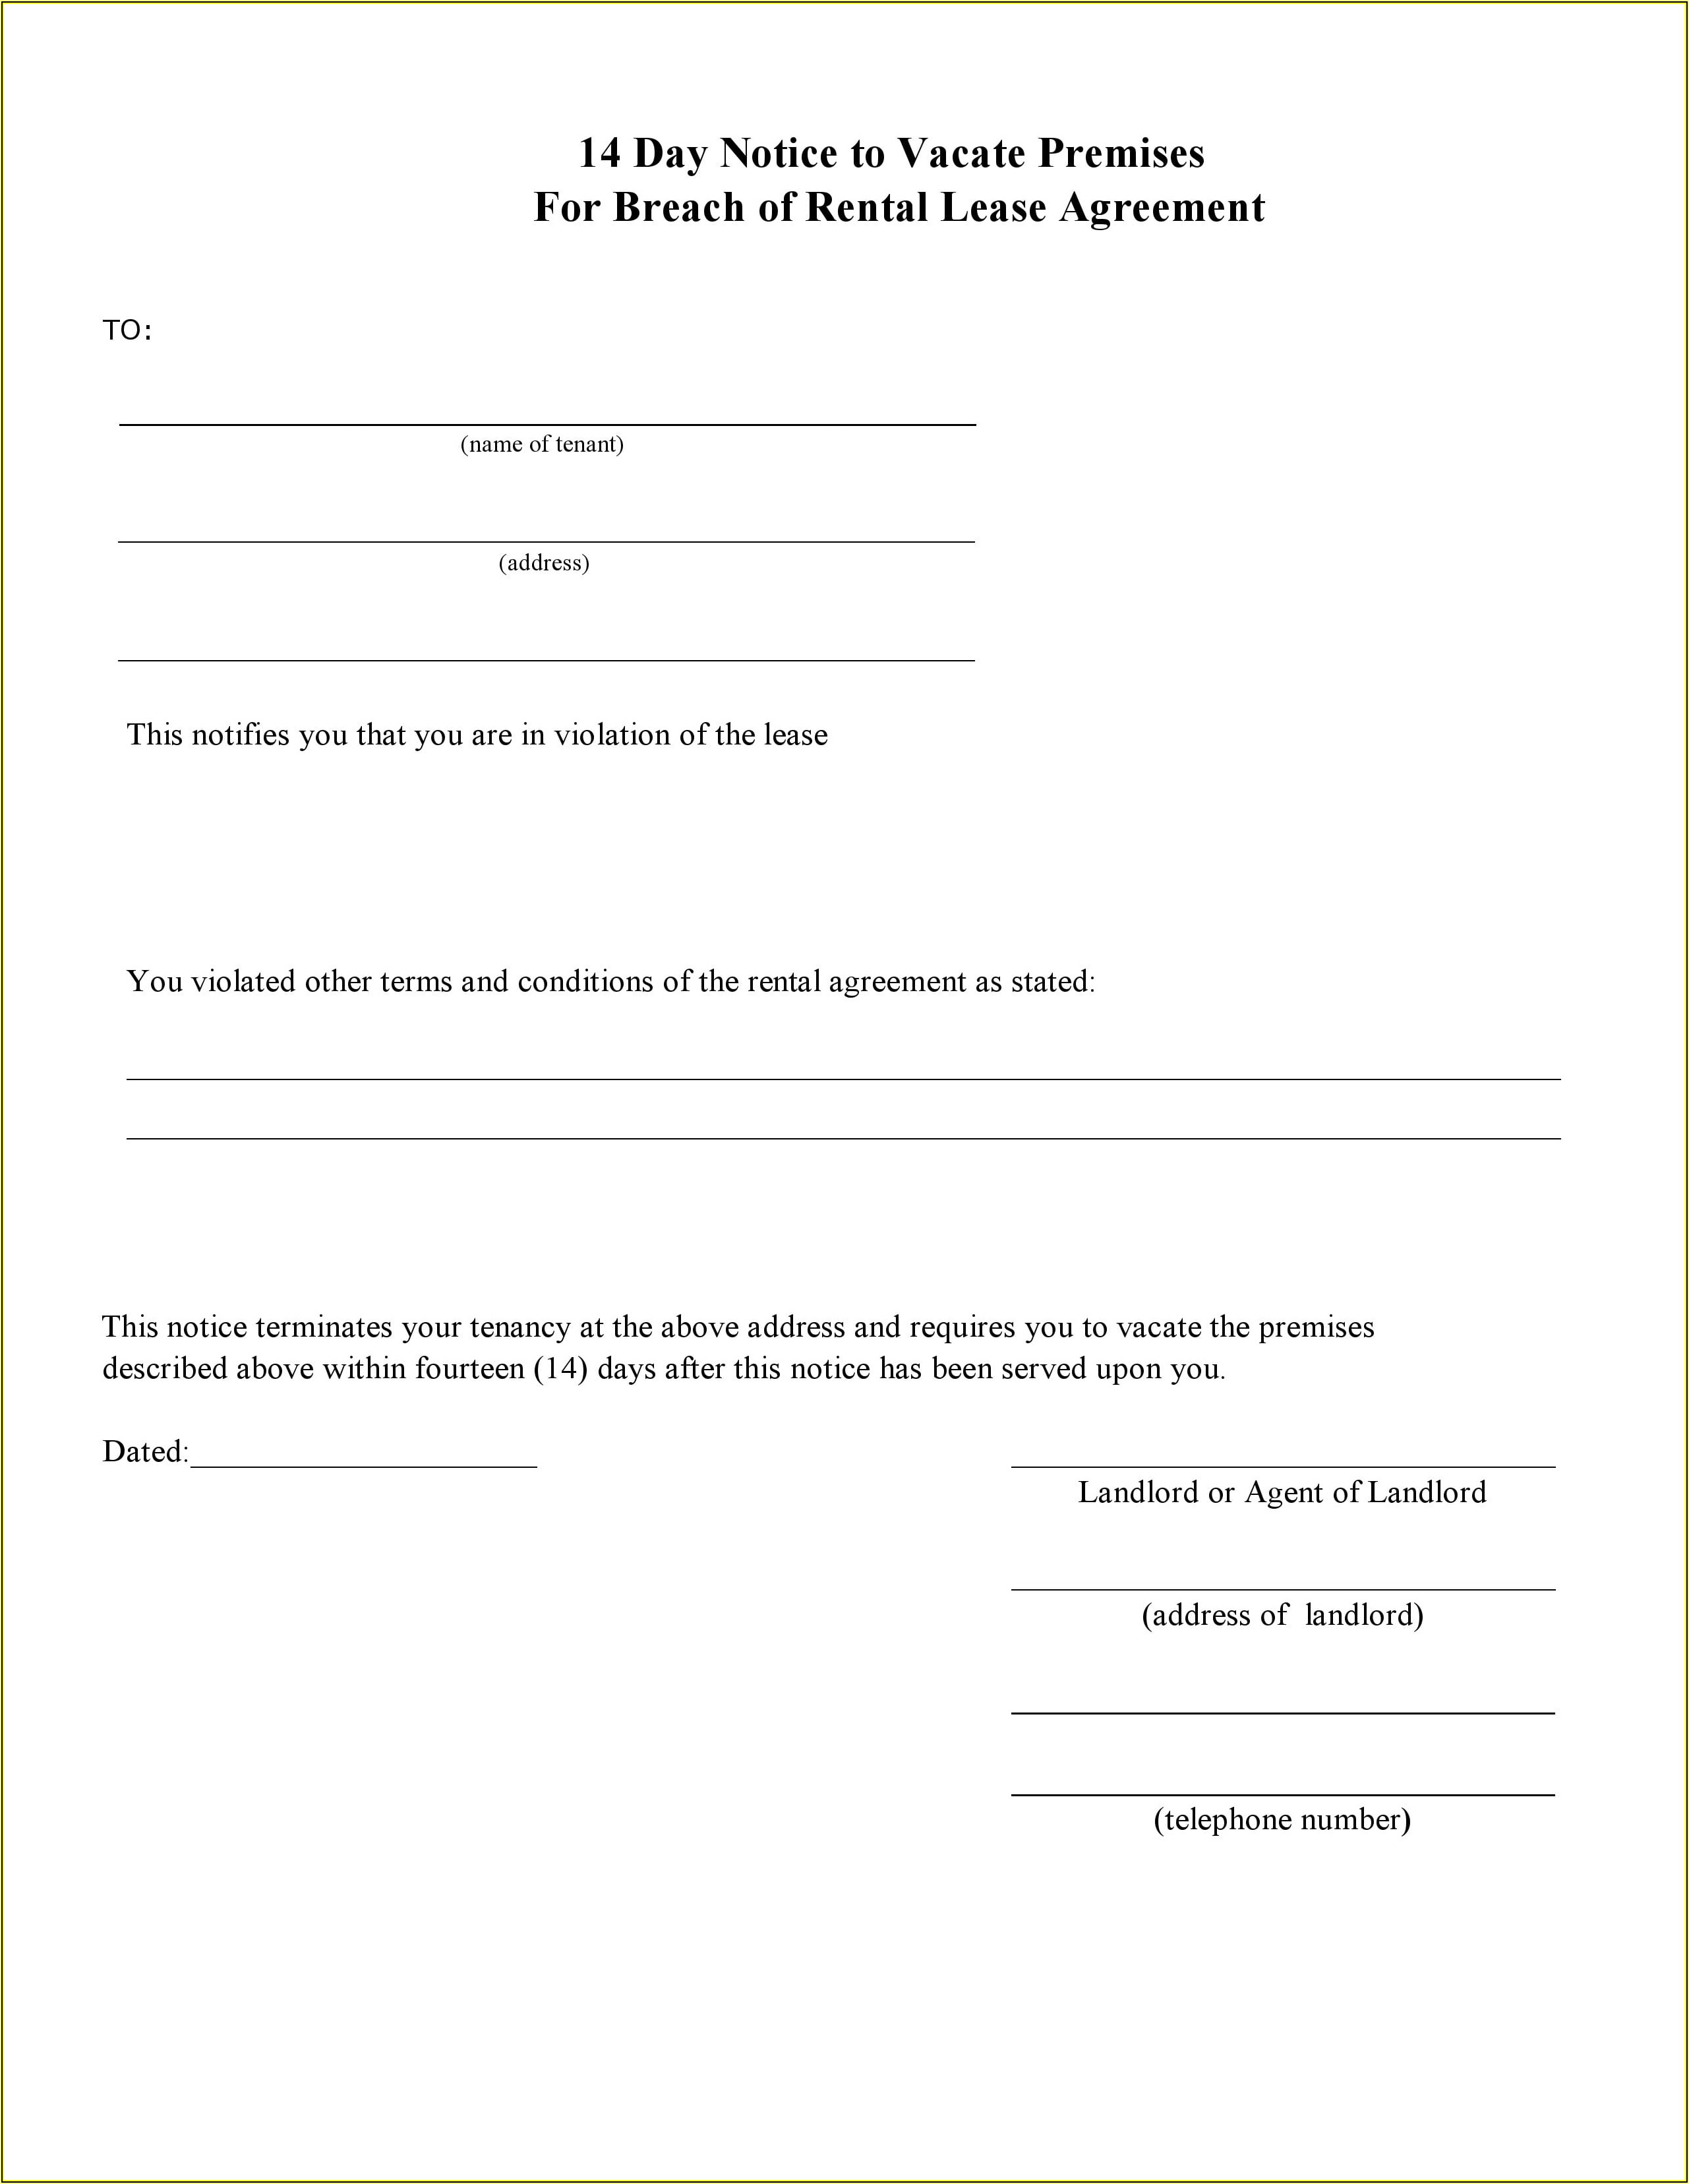 Sample Eviction Notice Form